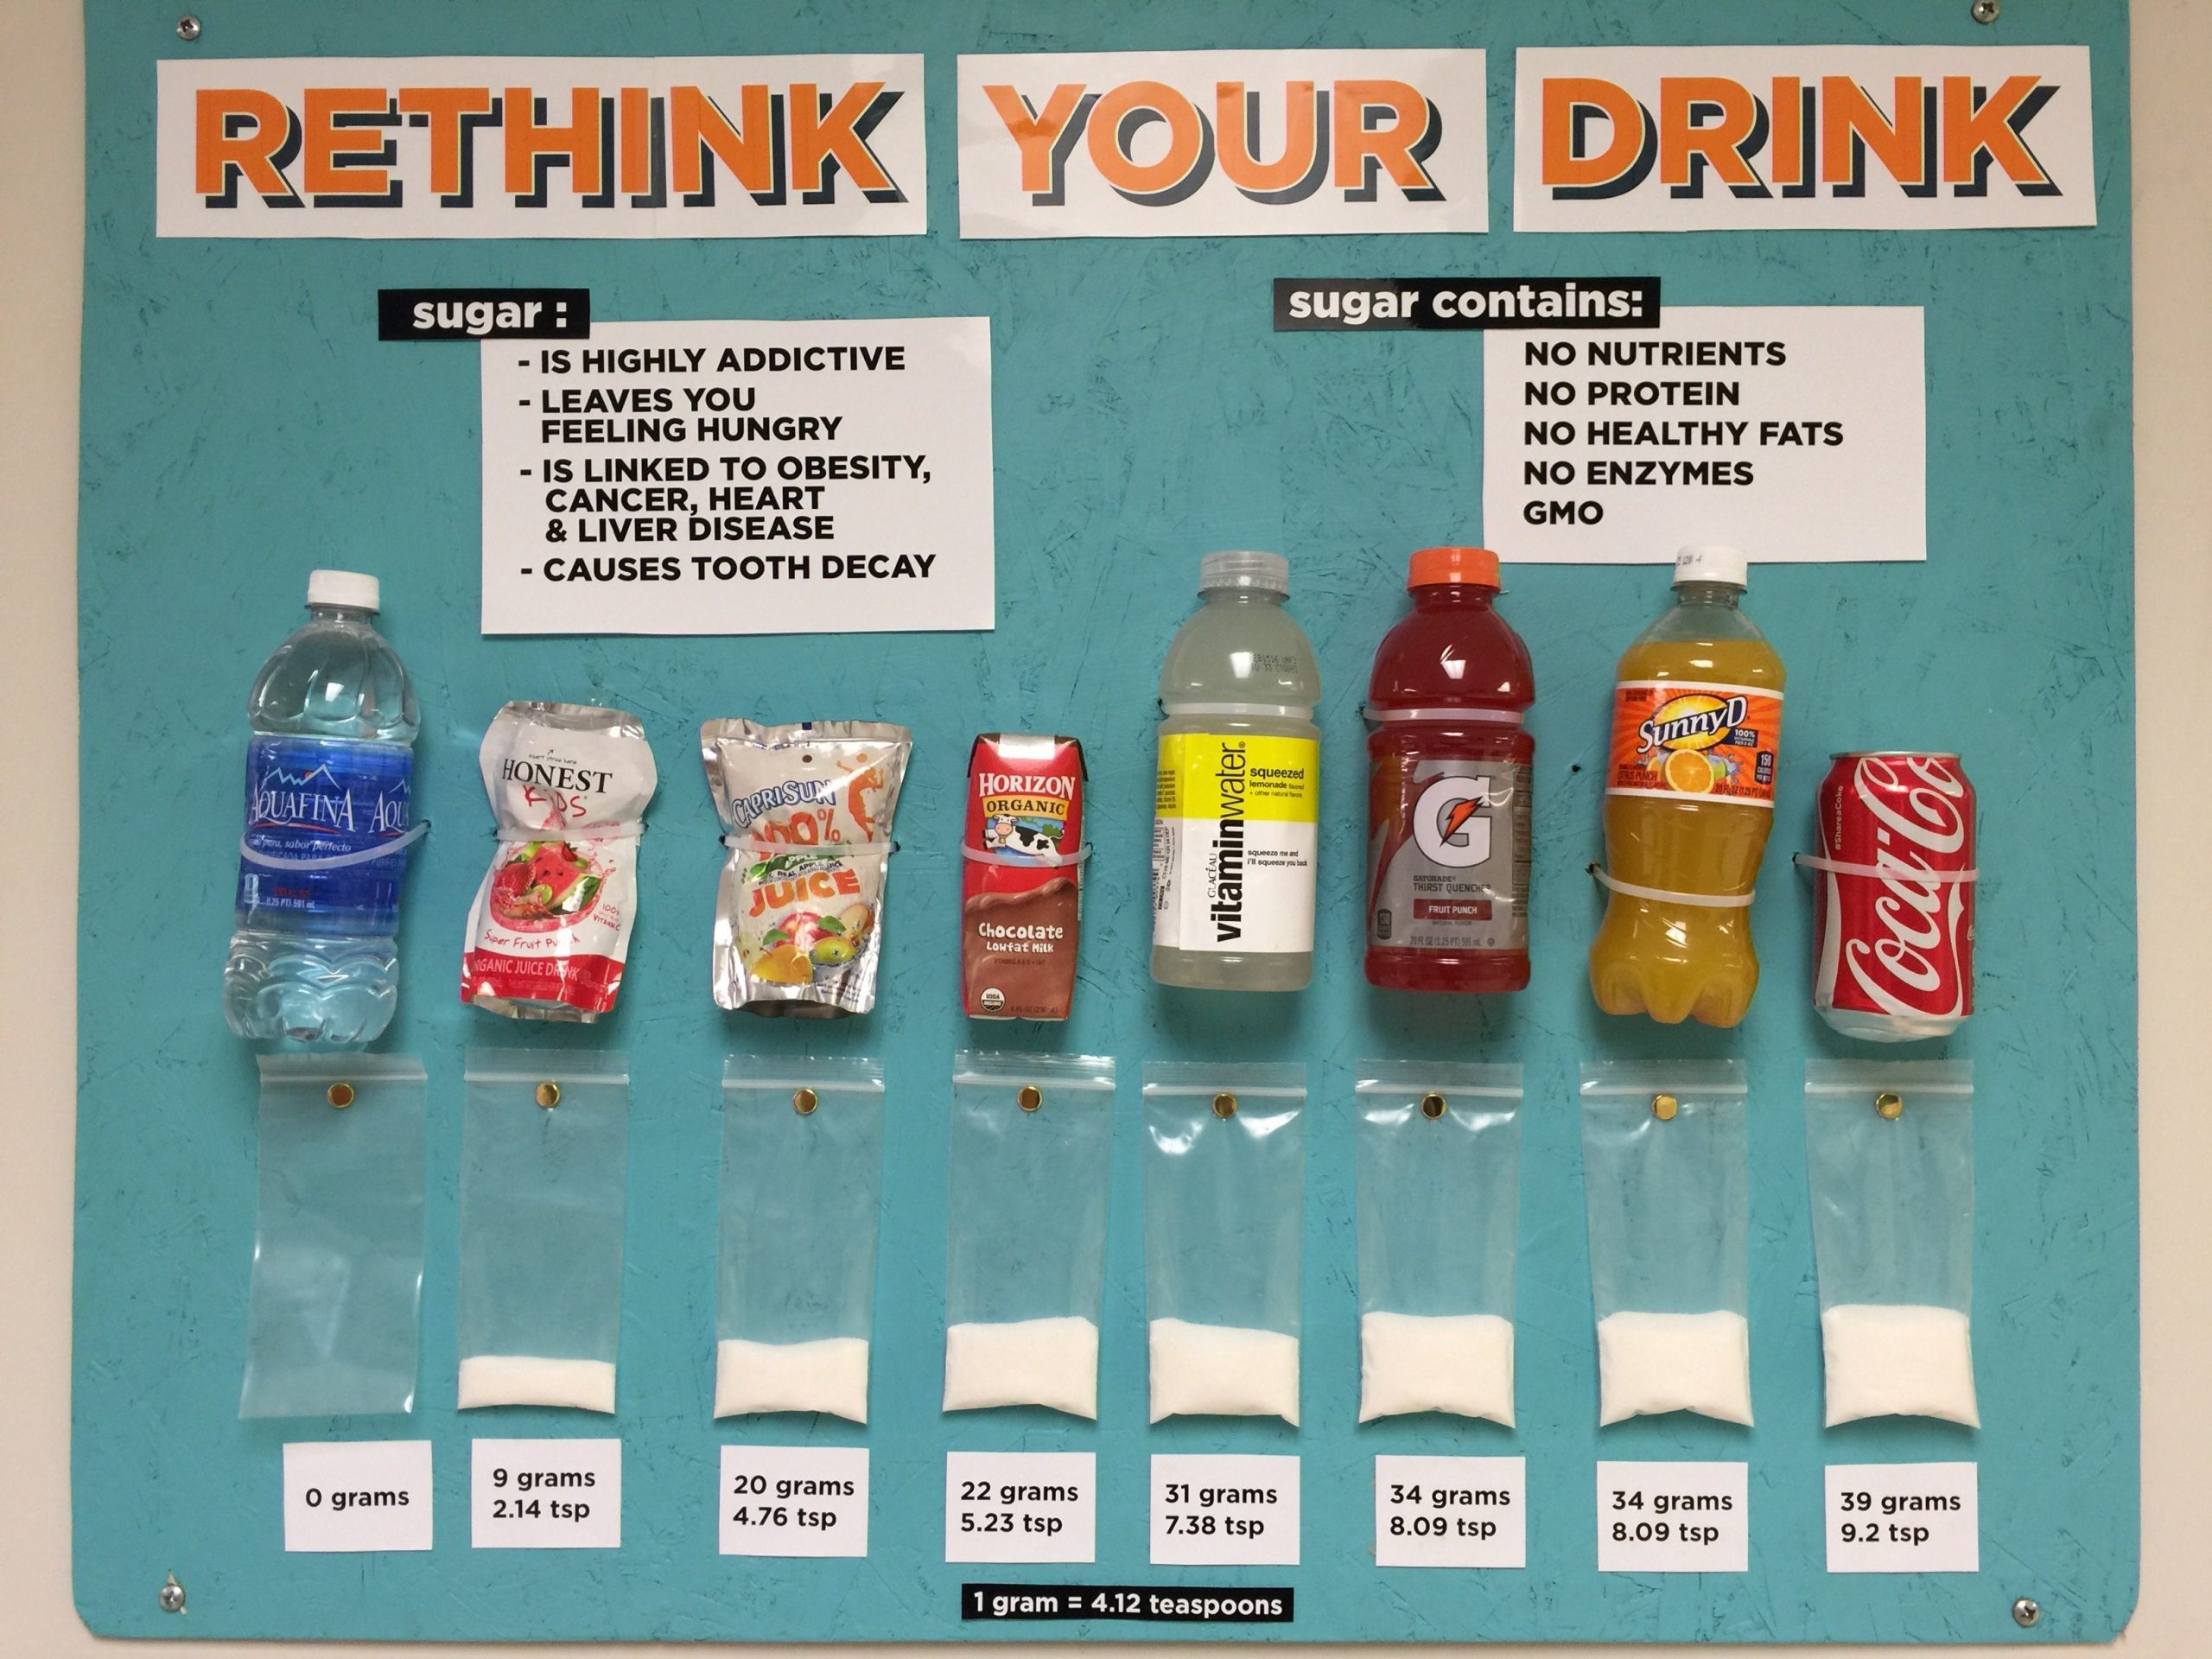 RETHINK YOUR DRINK. Bags of Sugar Reveal What